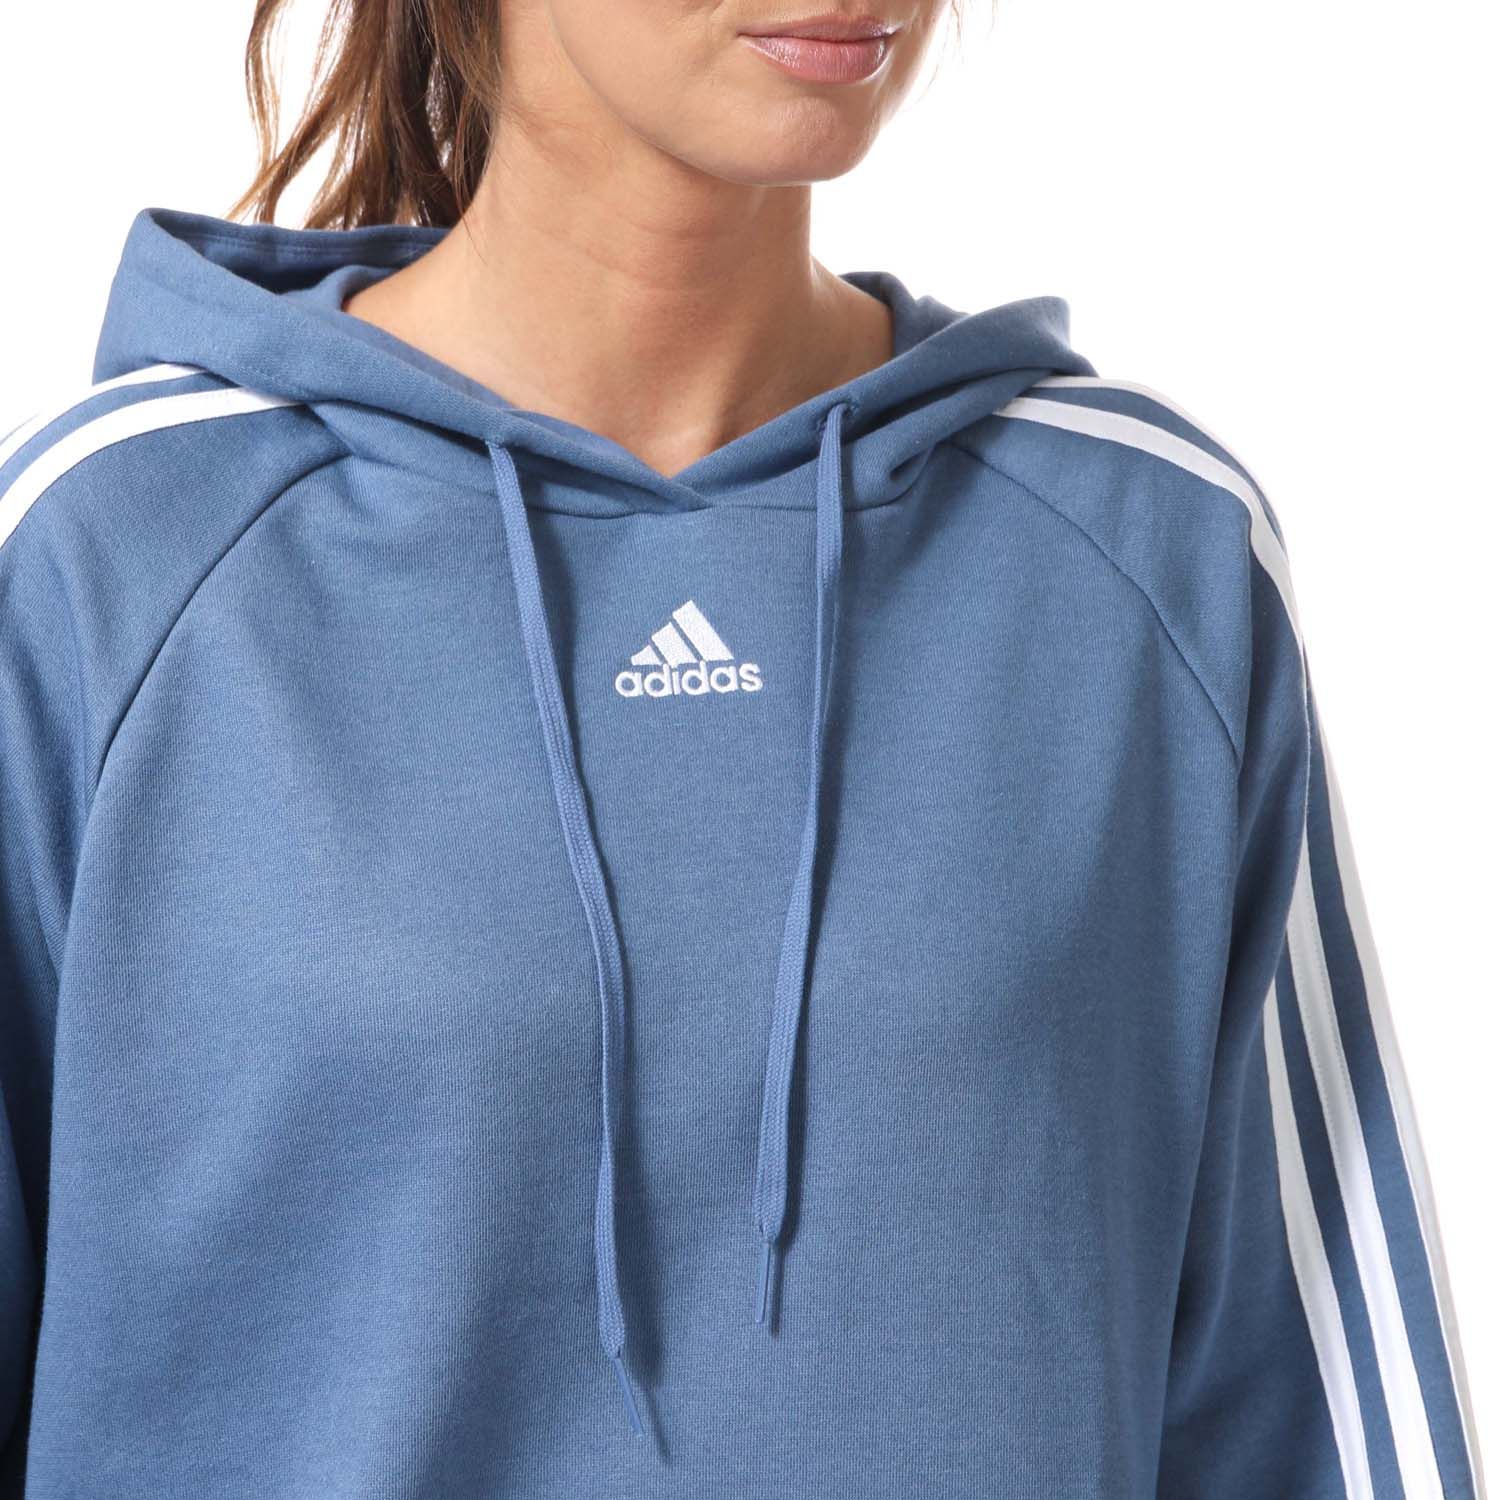 Womens adidas Essentials 3- Stripes Cropped Hoody in blue.- Drawcord-adjustable hood.- Long sleeves.- Ribbed cuffs and hem.- 3-Stripes down both arms.- adidas Badge of Sport logo on the chest.- Loose fit.- Main Material: 53% Cotton  36% Polyester (Recycled)  11% Rayon. Hood Lining: 100% Cotton. - Ref:GL1461